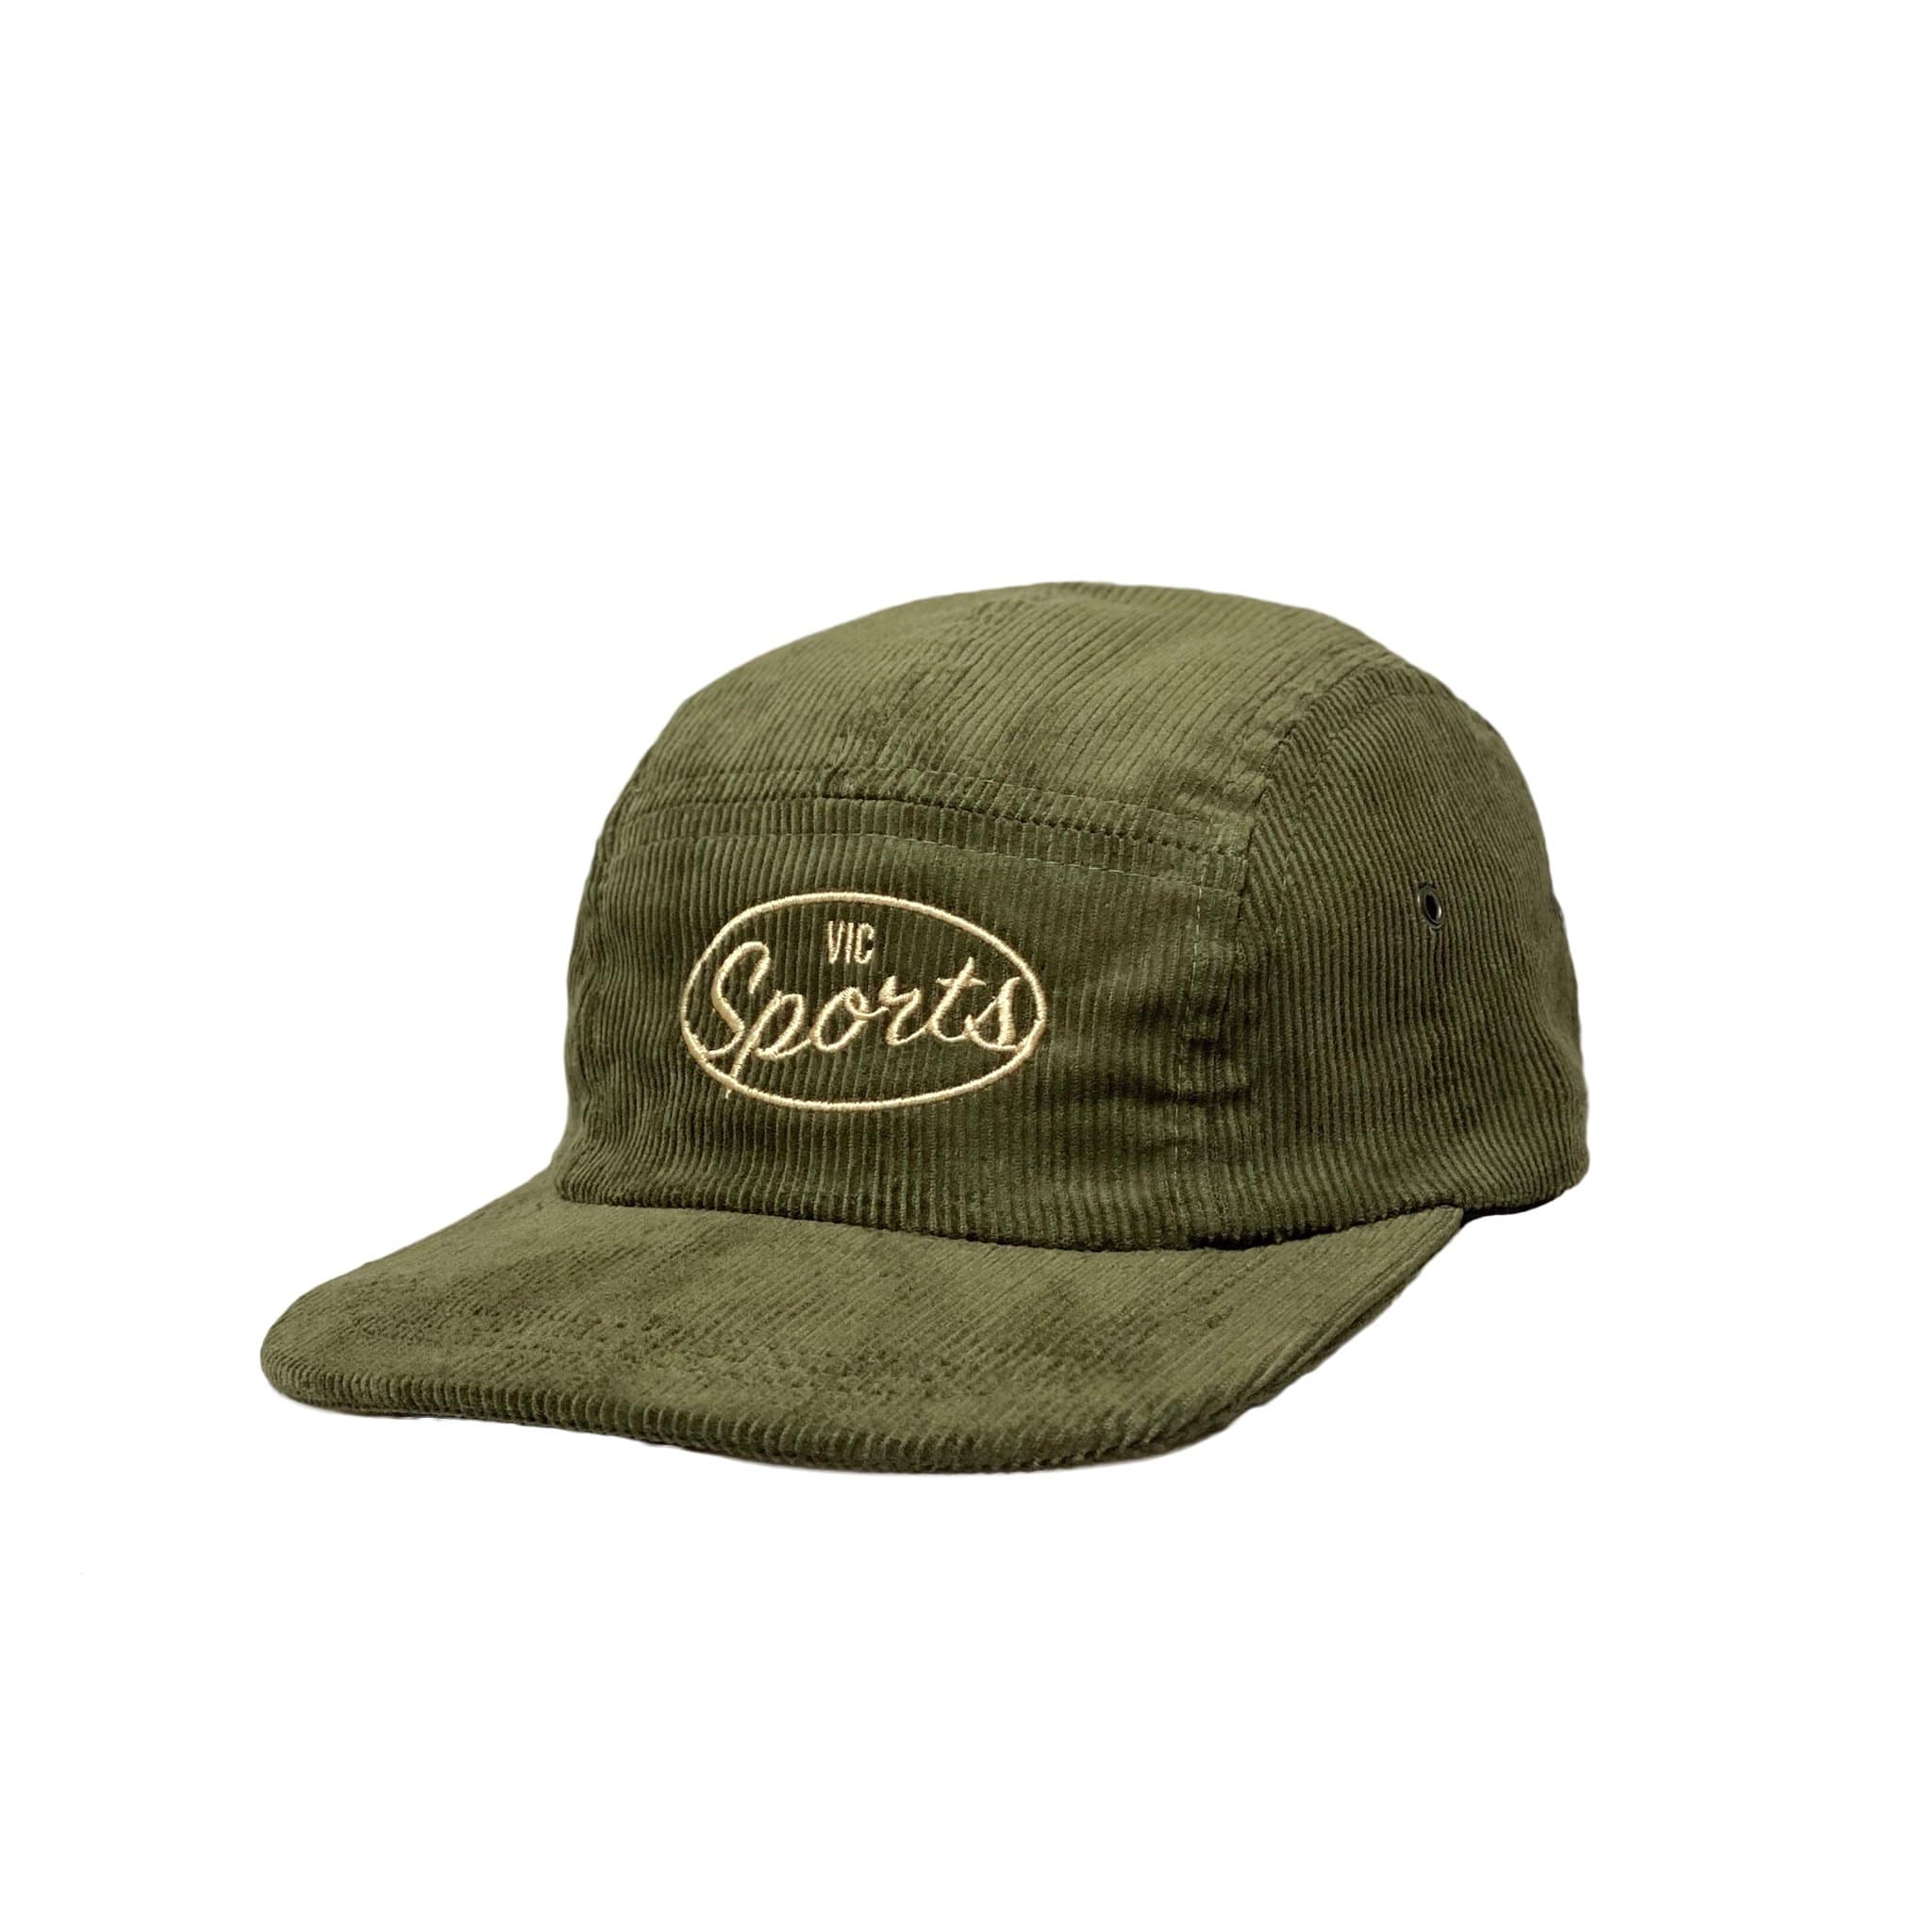 Premium quality corduroy 5-panel camp hat by New Zealand skate and streetwear clothing label VIC Apparel. Embroidered logo. Classic vintage camp cap style, hand made in New Zealand.